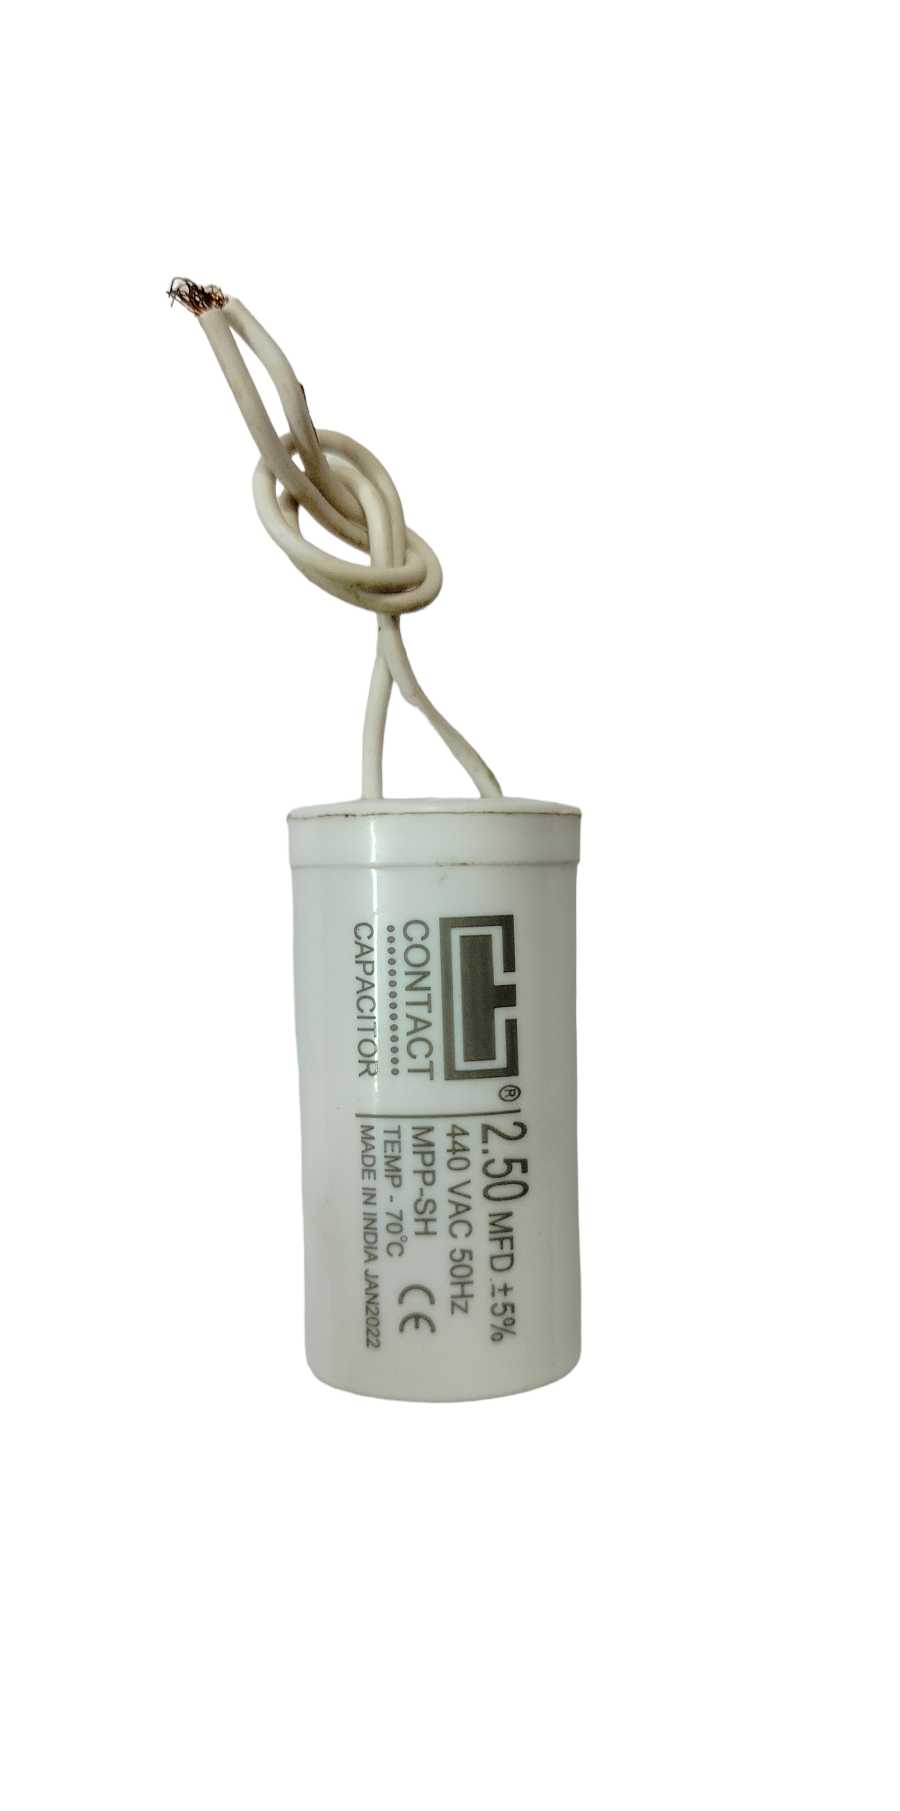 Contact Capacitor 2.50 MFD Supplier in india